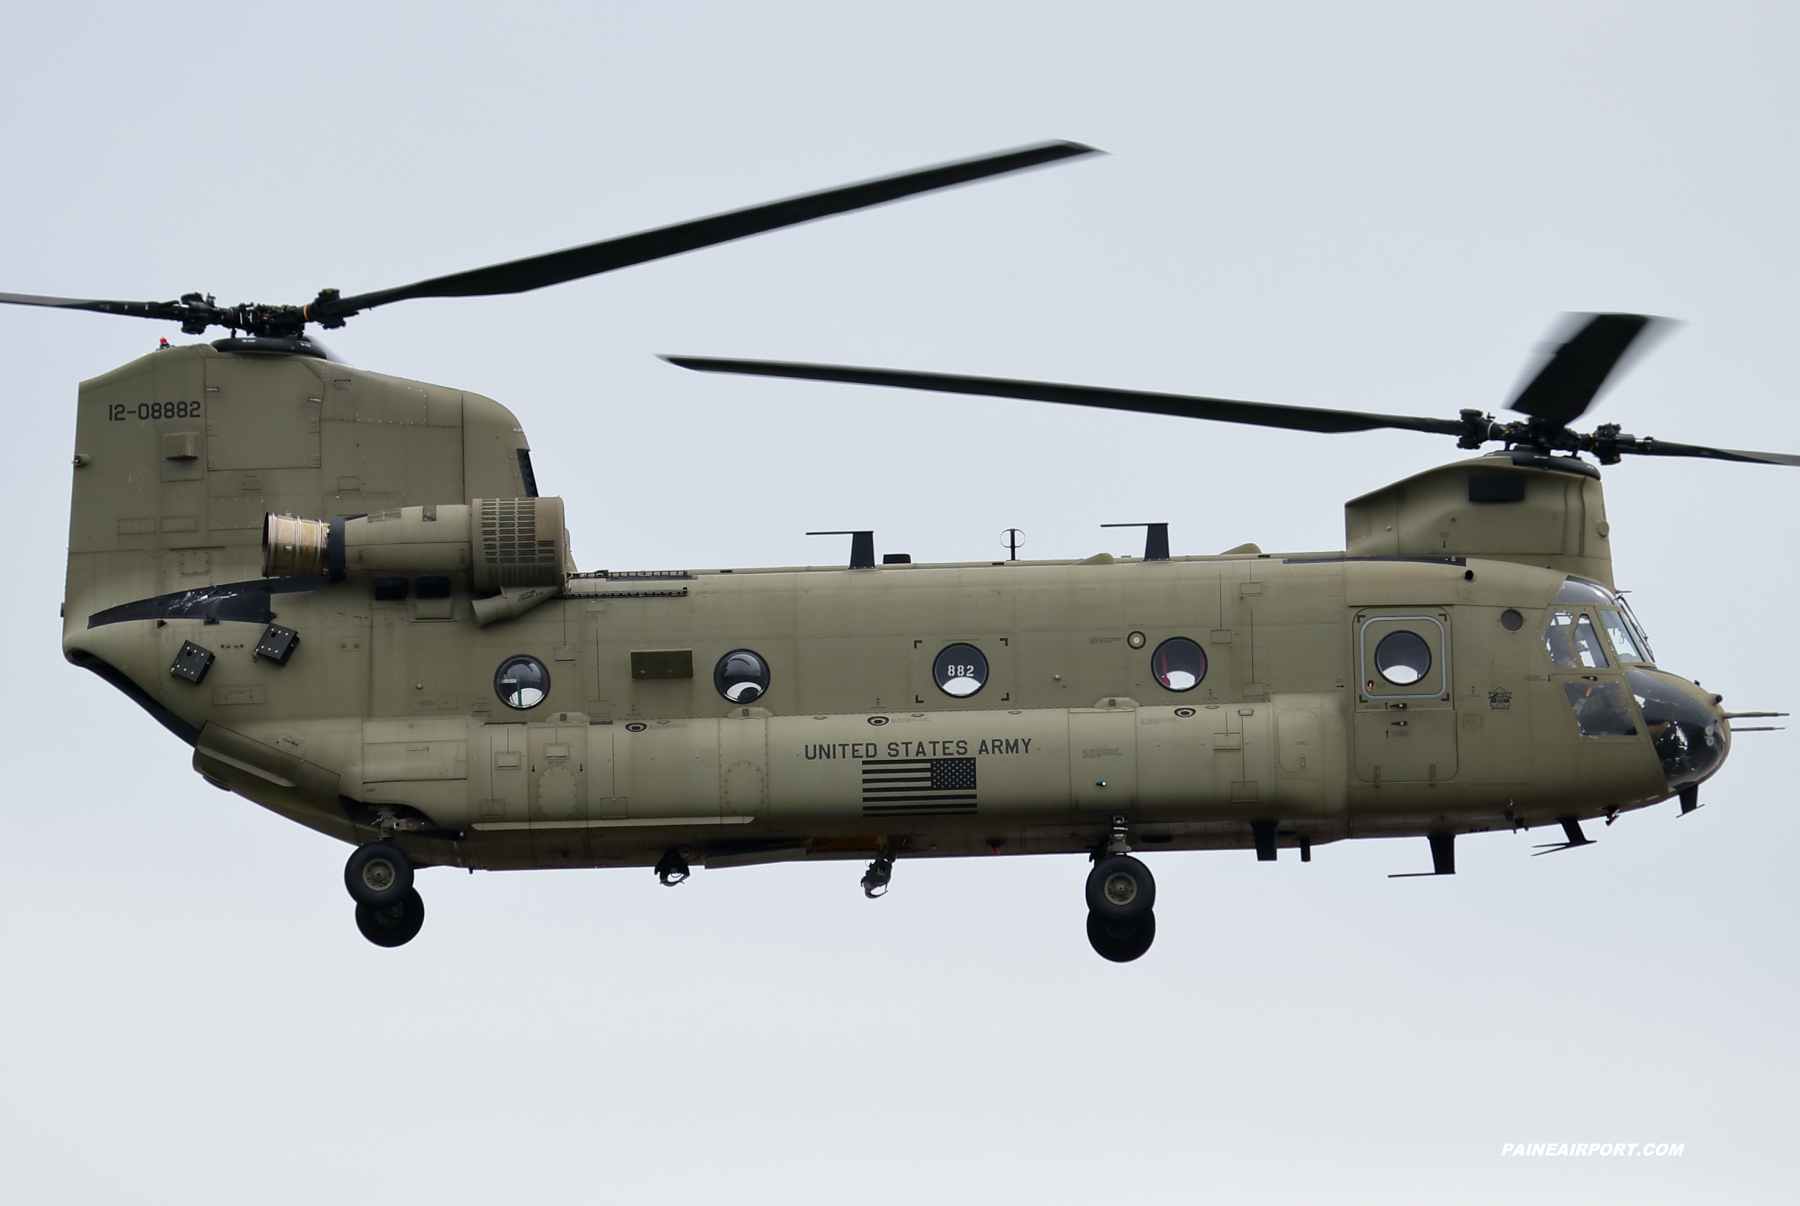 CH-47 12-08882 at Paine Field 